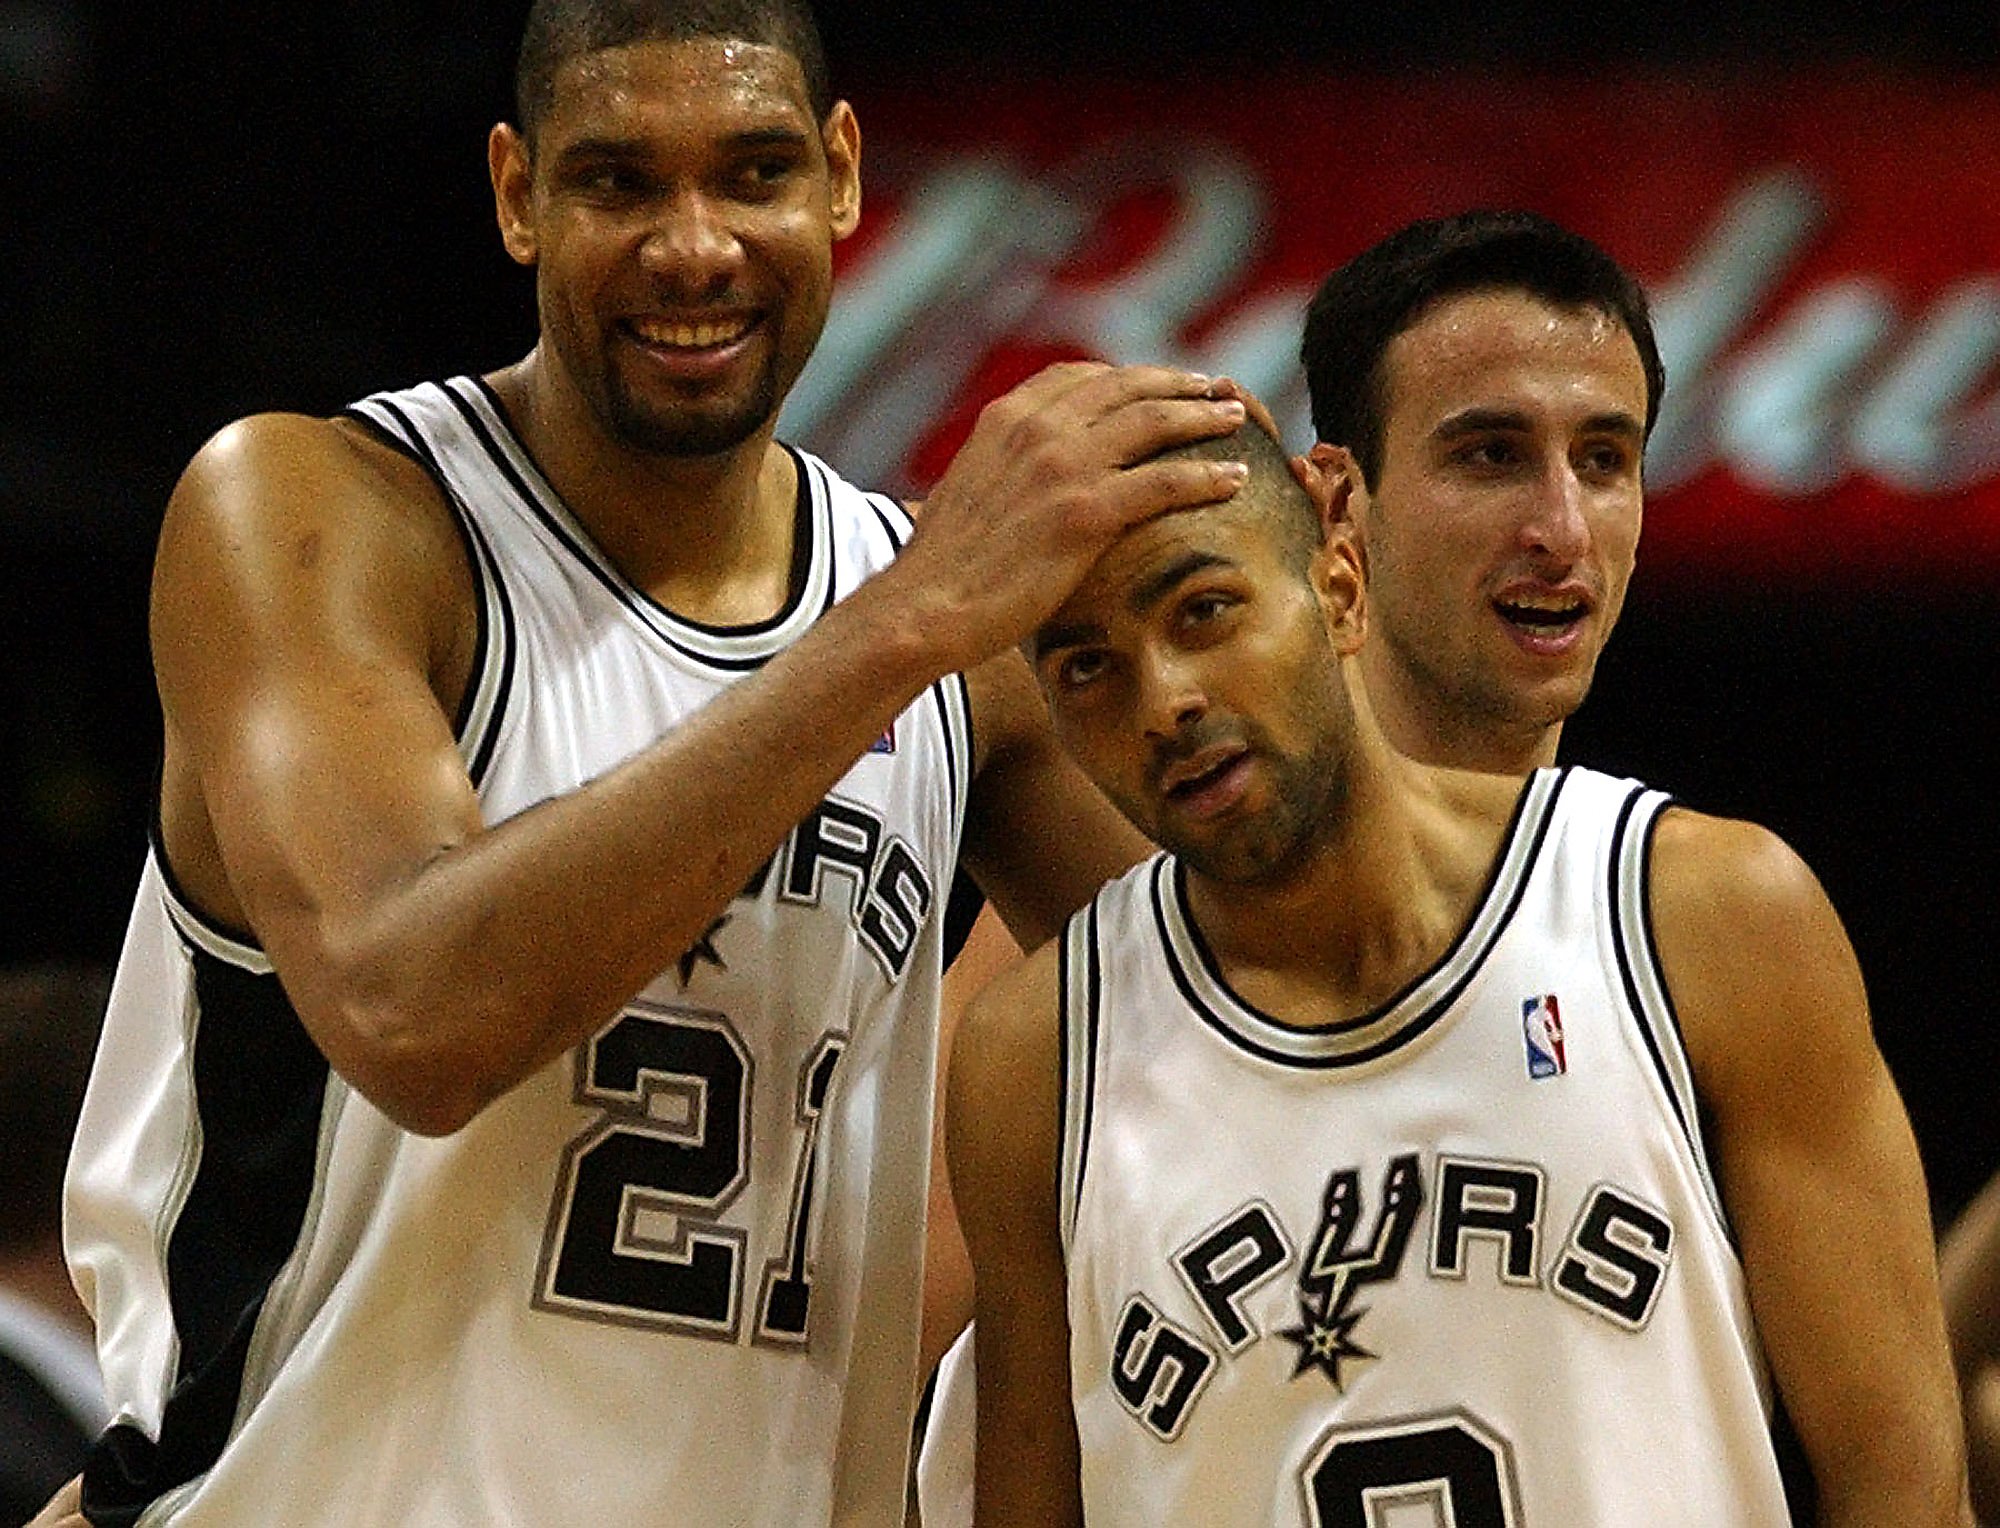 Update: The Spurs will retire Tony Parker's jersey on November 11 -  Pounding The Rock